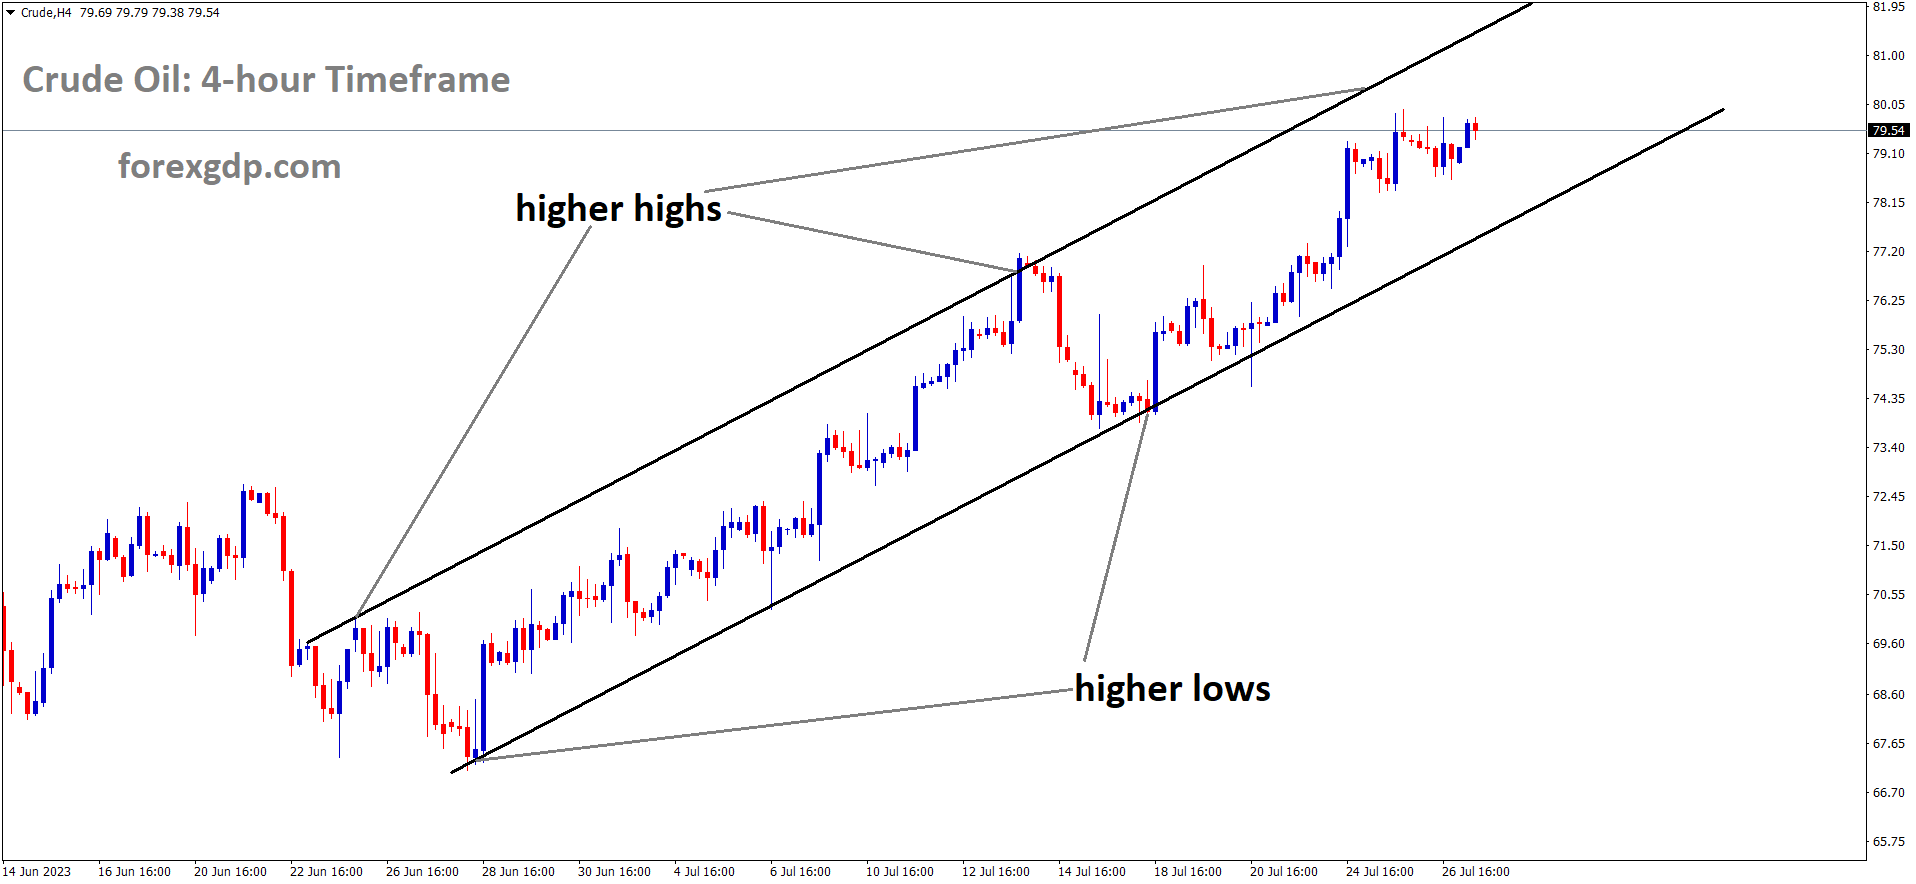 Crude Oil Price is moving in an Ascending channel and the market has reached the higher high area of the channel